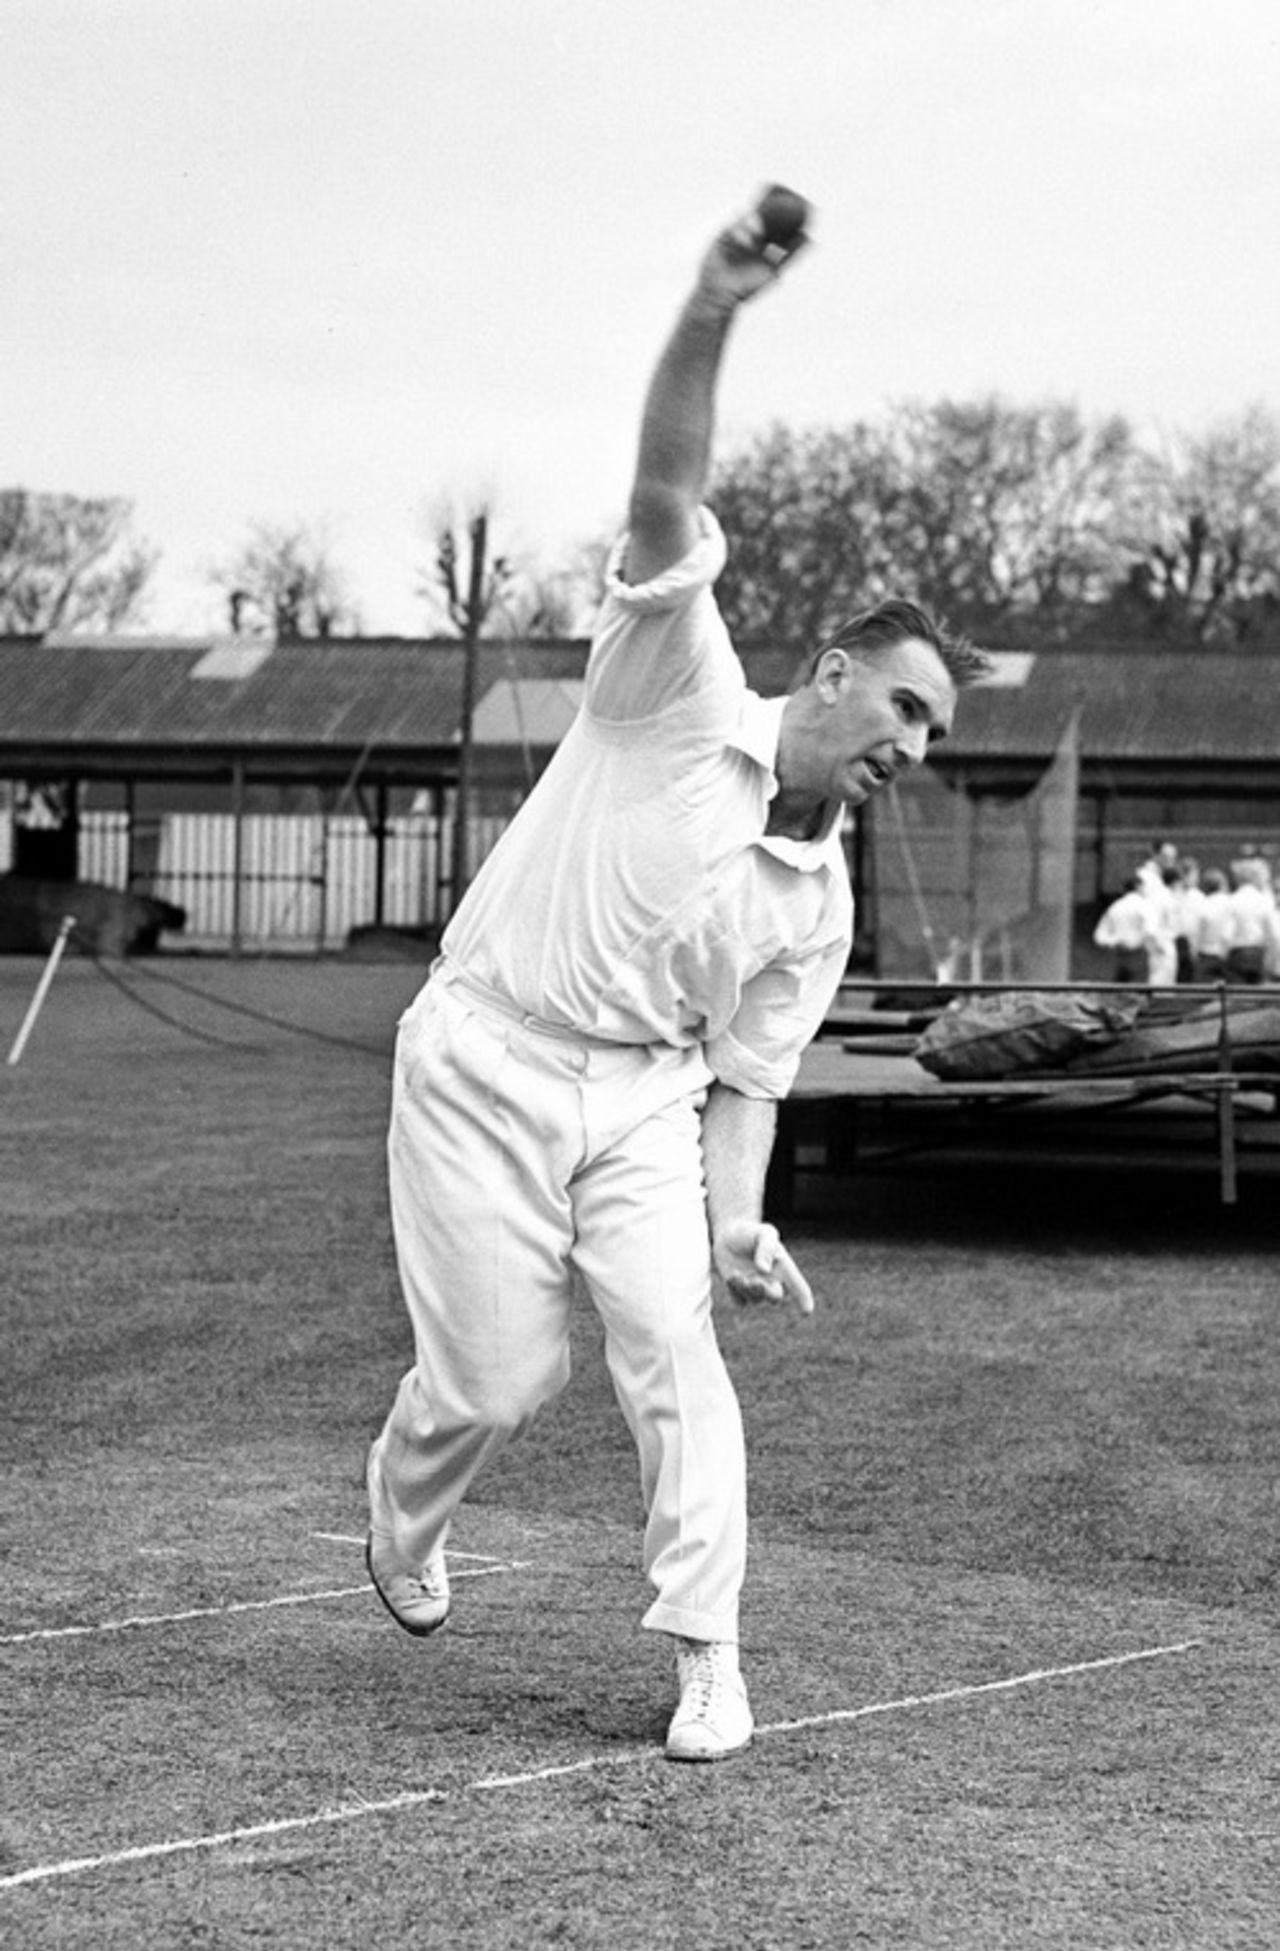 John Reid bowls in the nets, New Zealand tour of England, 1958